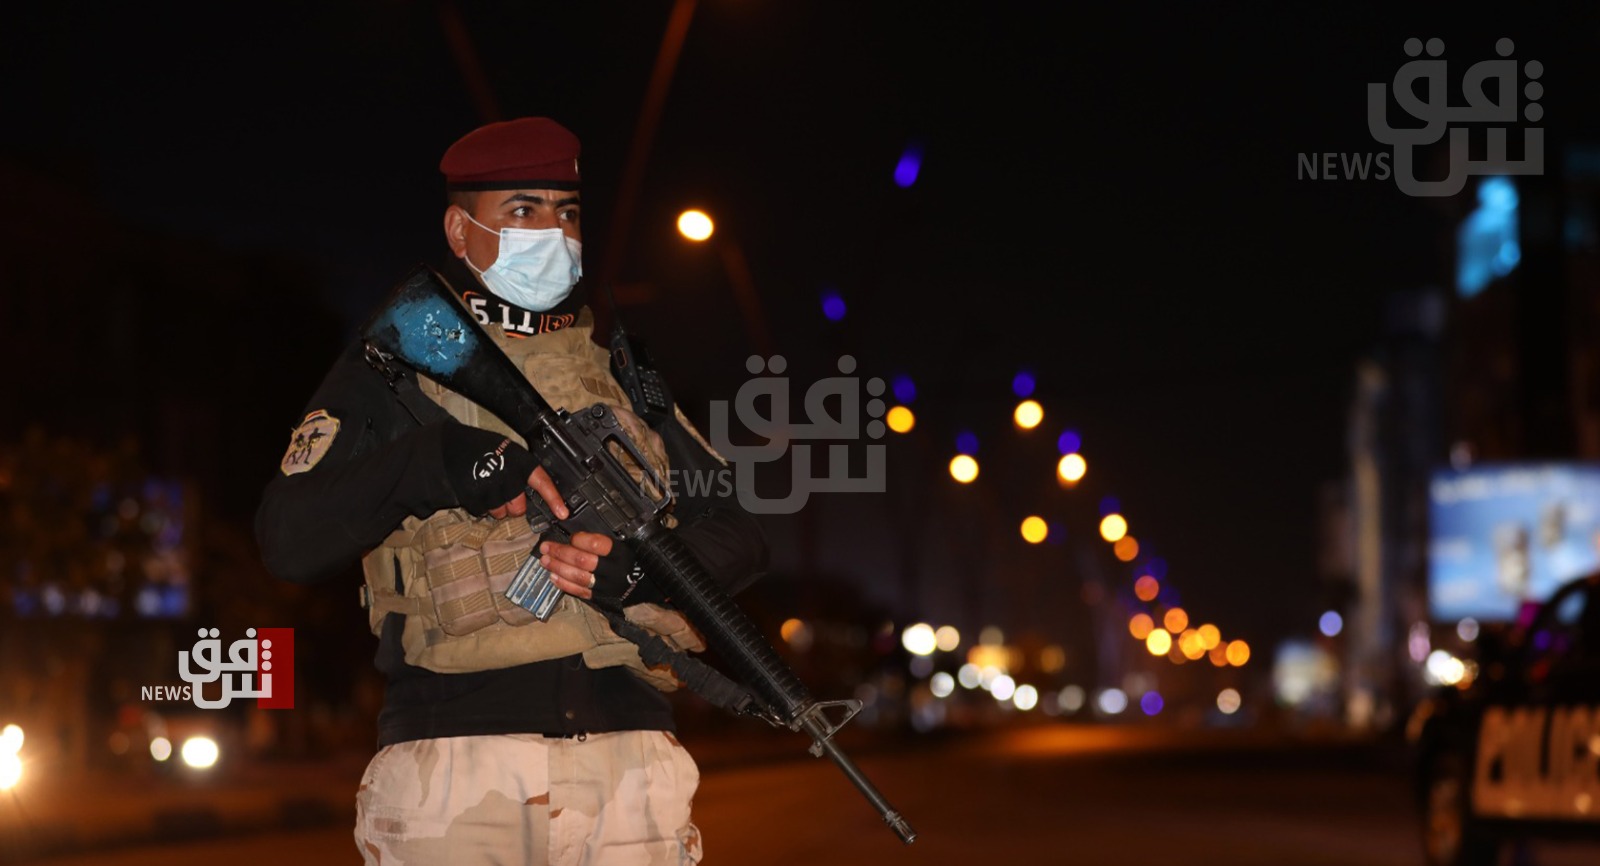 Two attacks in Baghdad within an hour